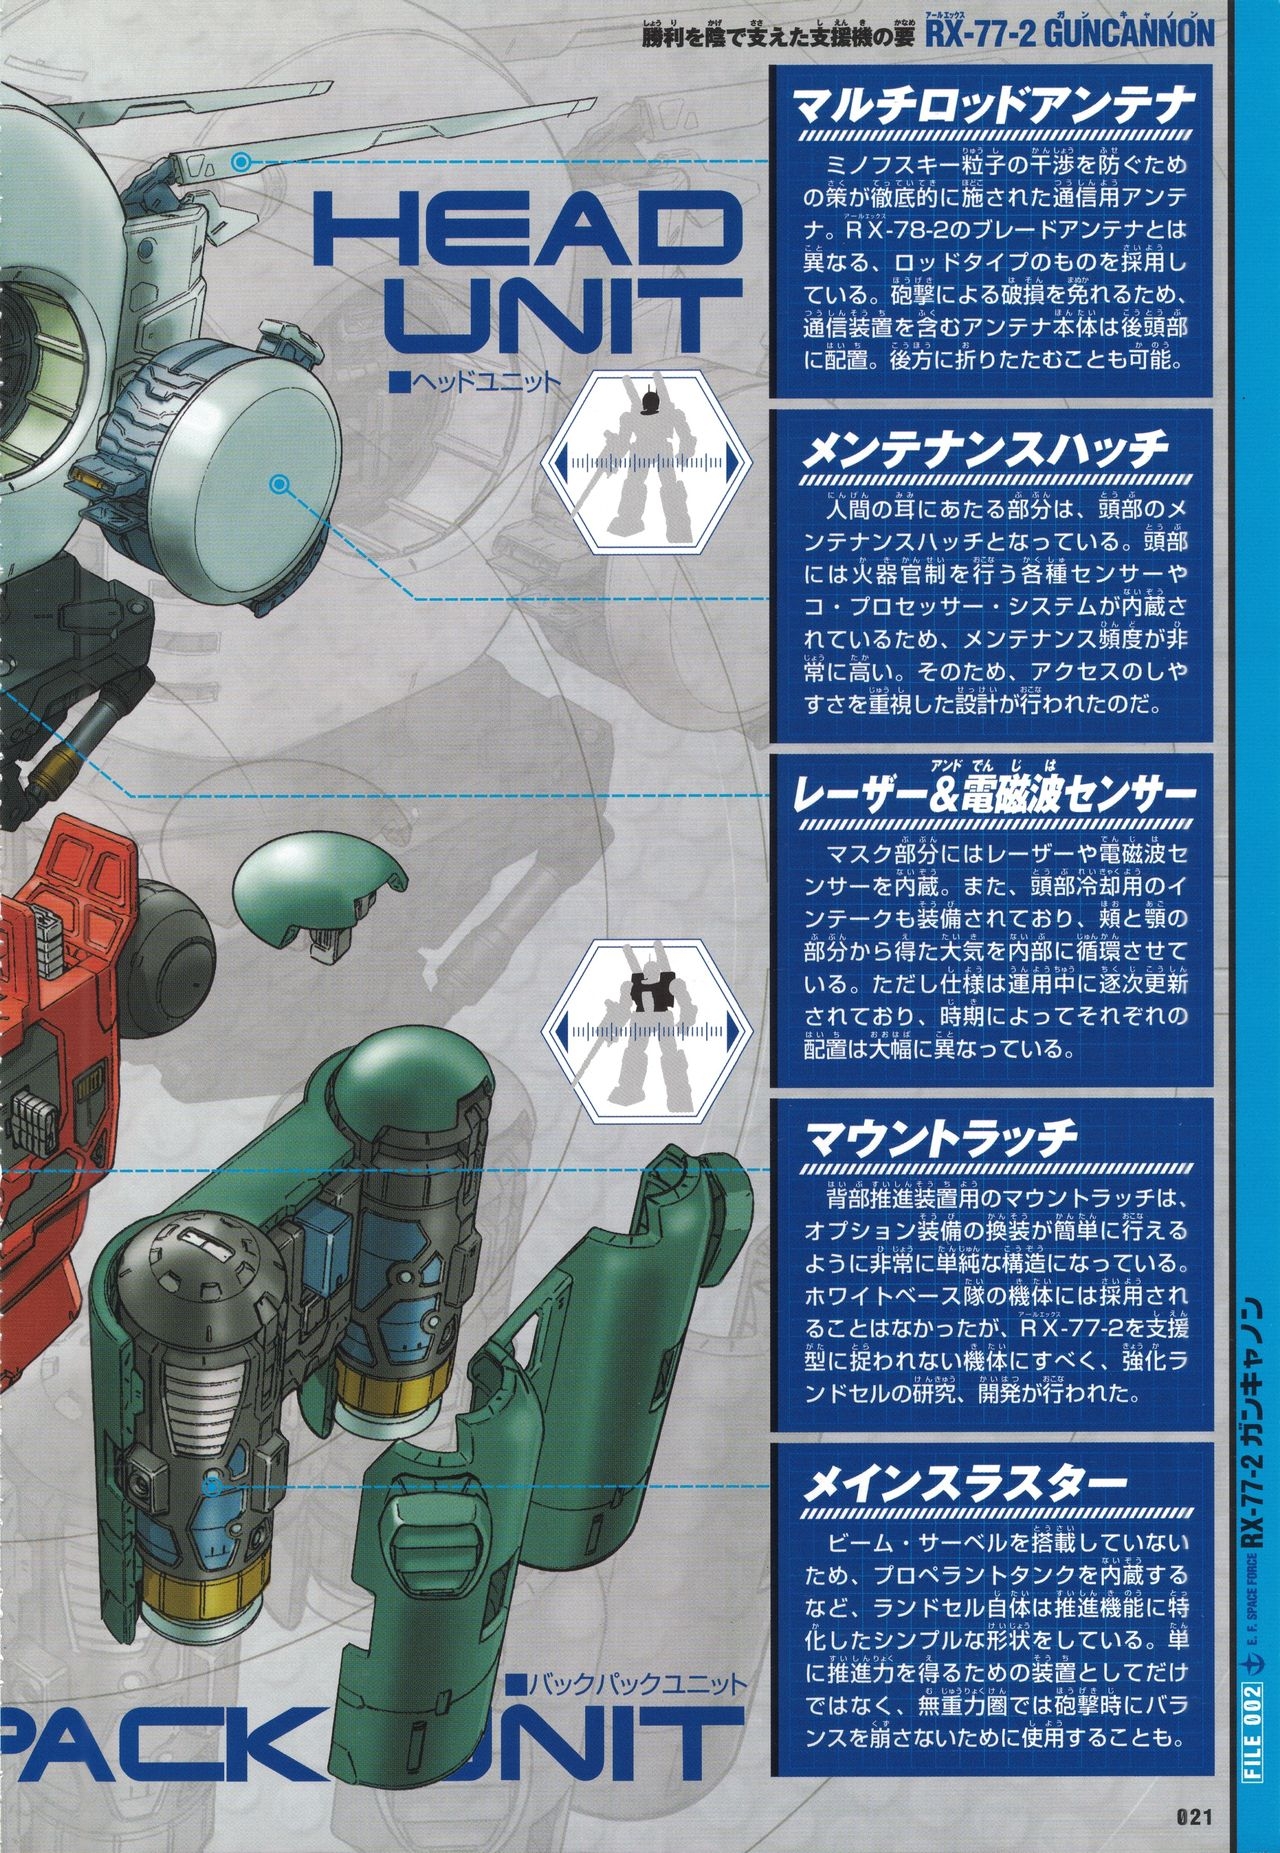 Mobile Suit Gundam - New Cross-Section Book - One Year War Edition 23